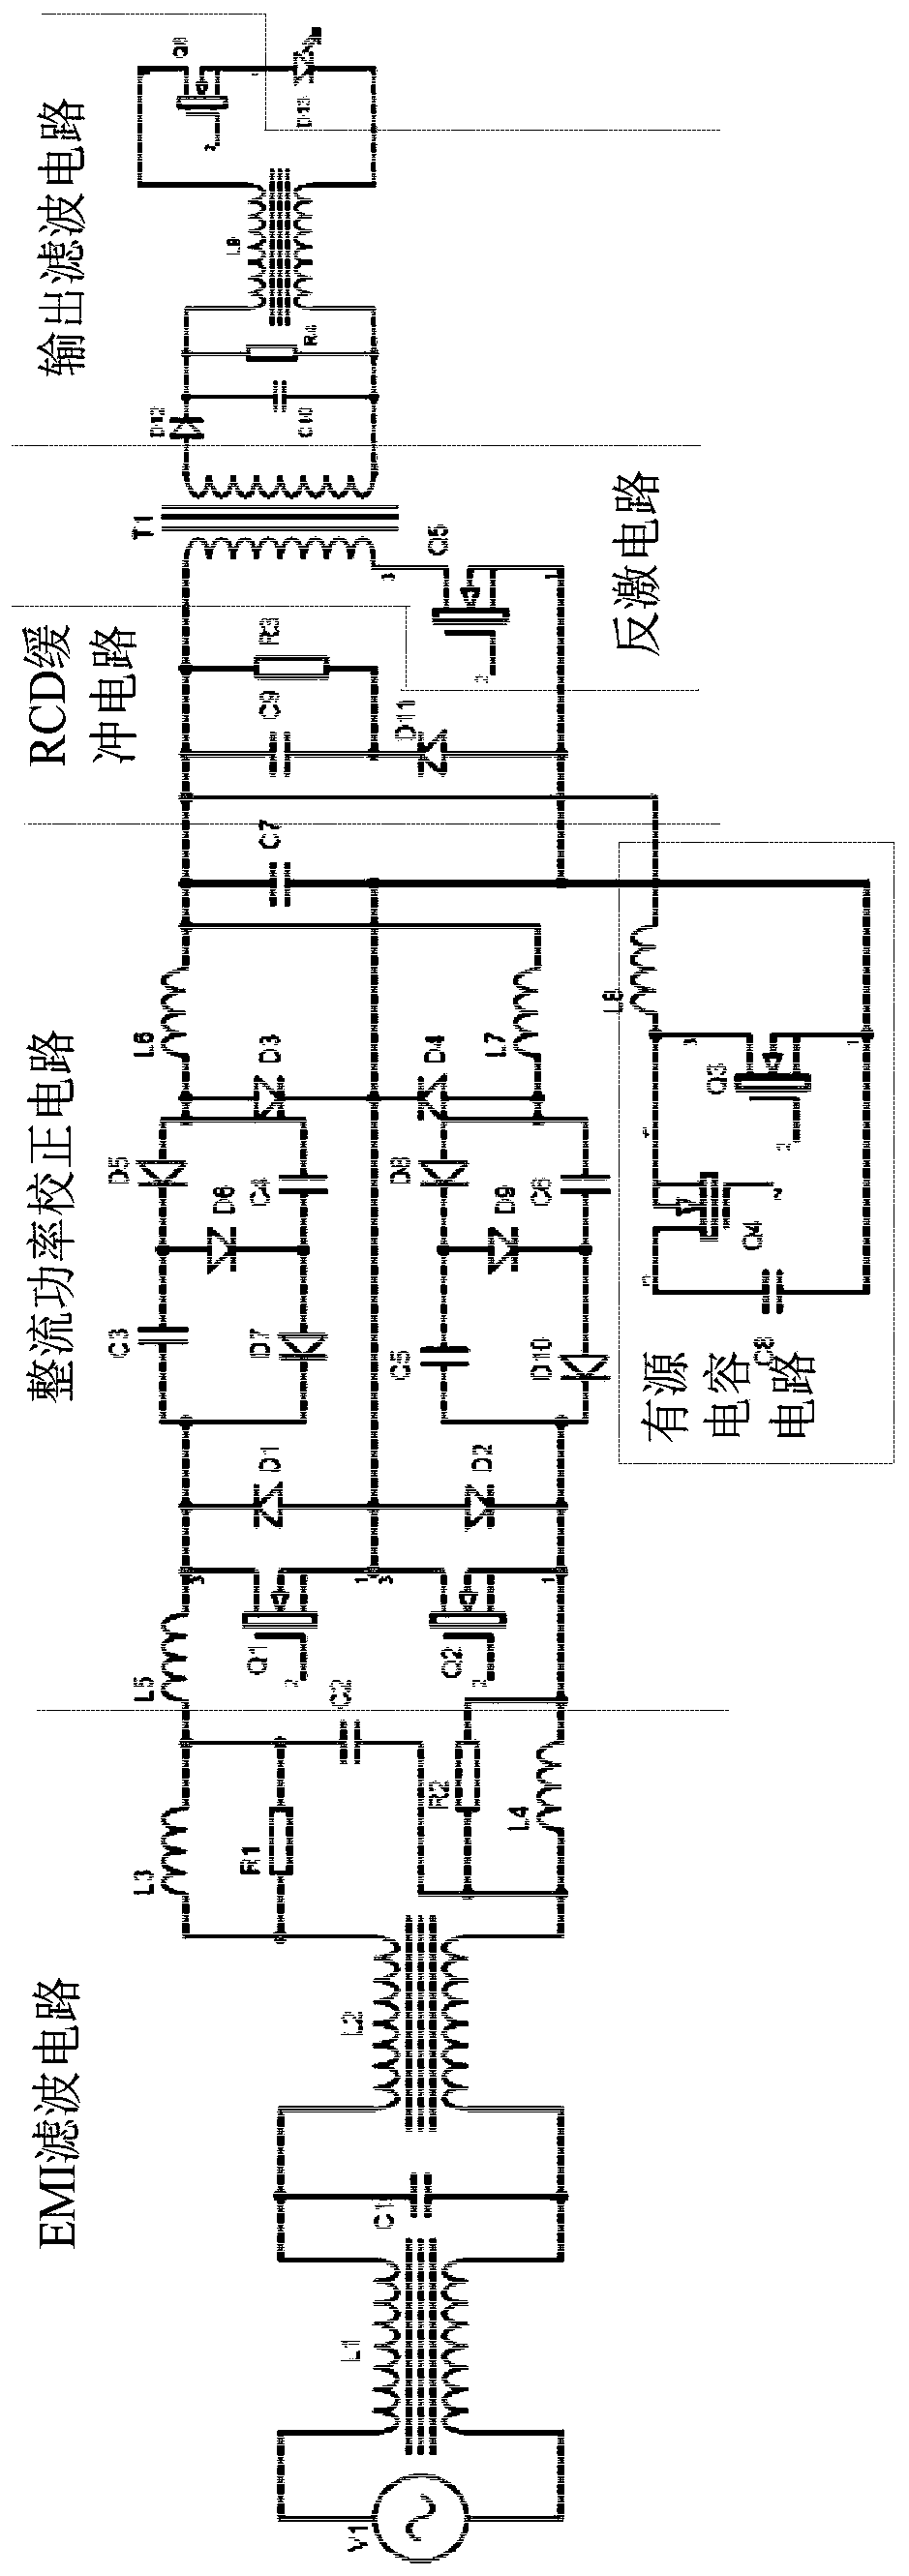 LED stroboscopic driving power supply of novel rectification power rectification topology structure